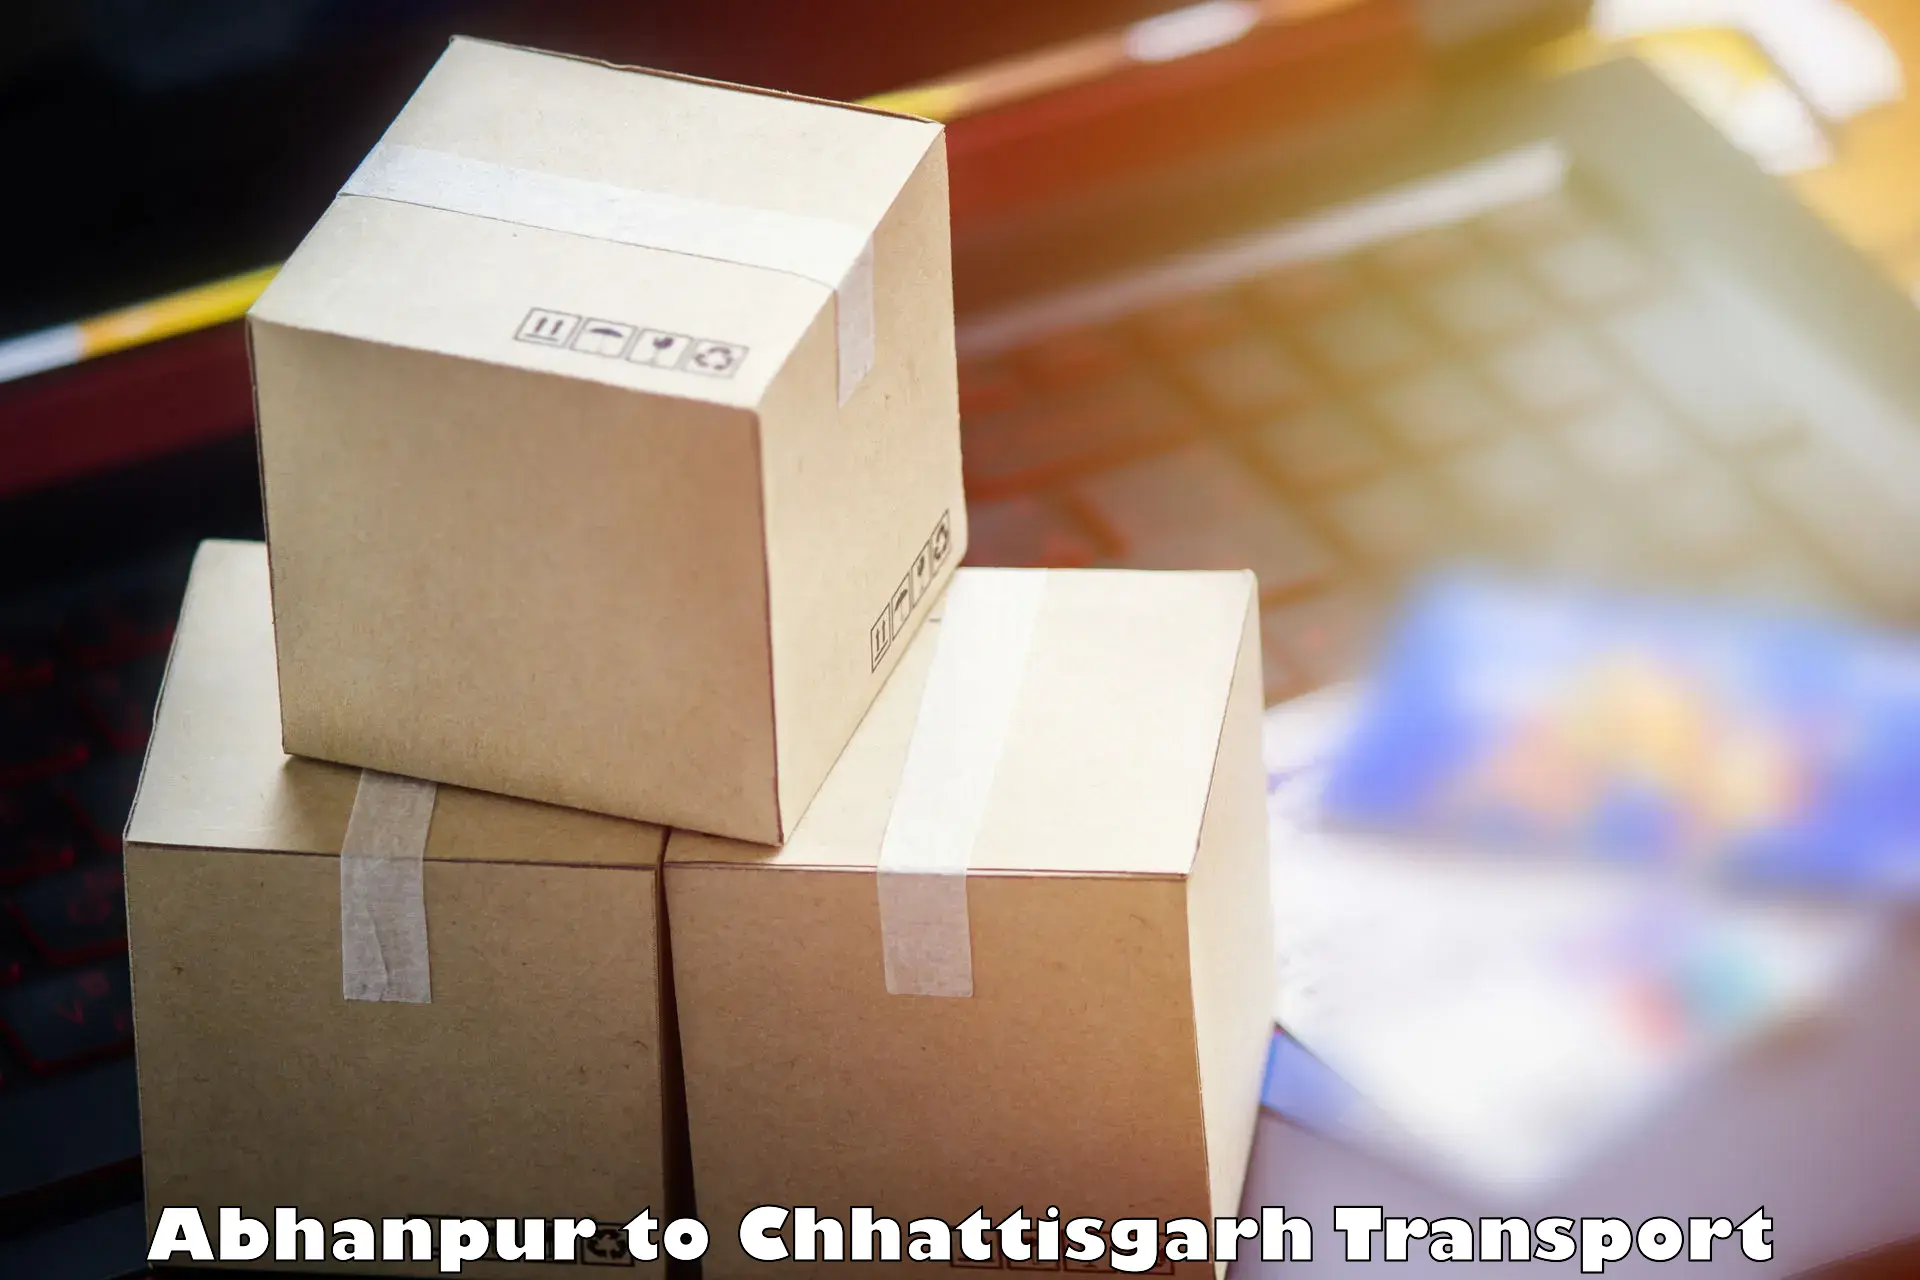 Domestic goods transportation services Abhanpur to Bargidih